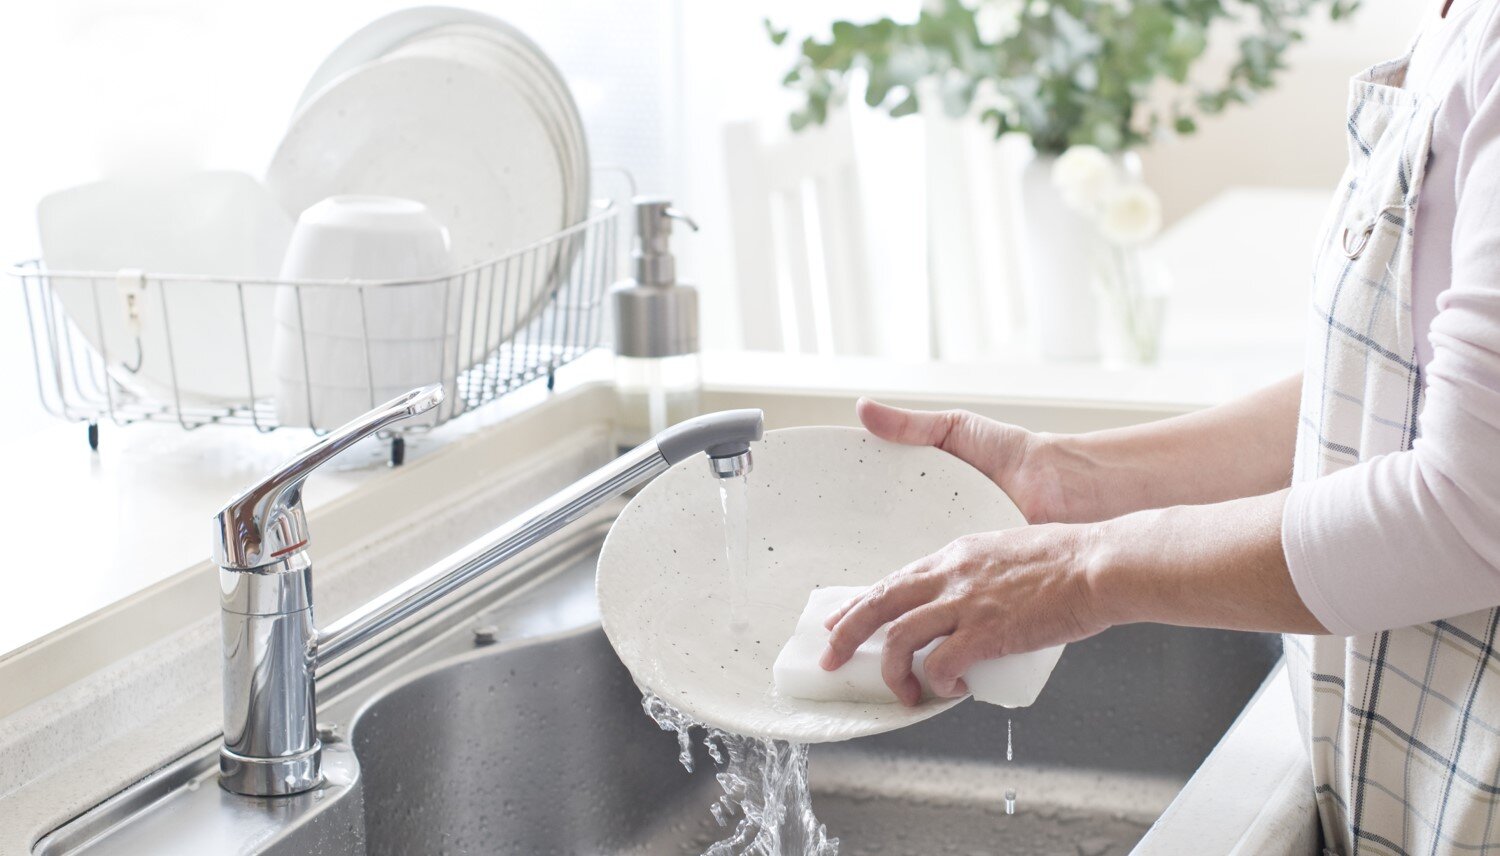 Washing dishes could cleanse mind: Study finds meditation opportunity at  the sink